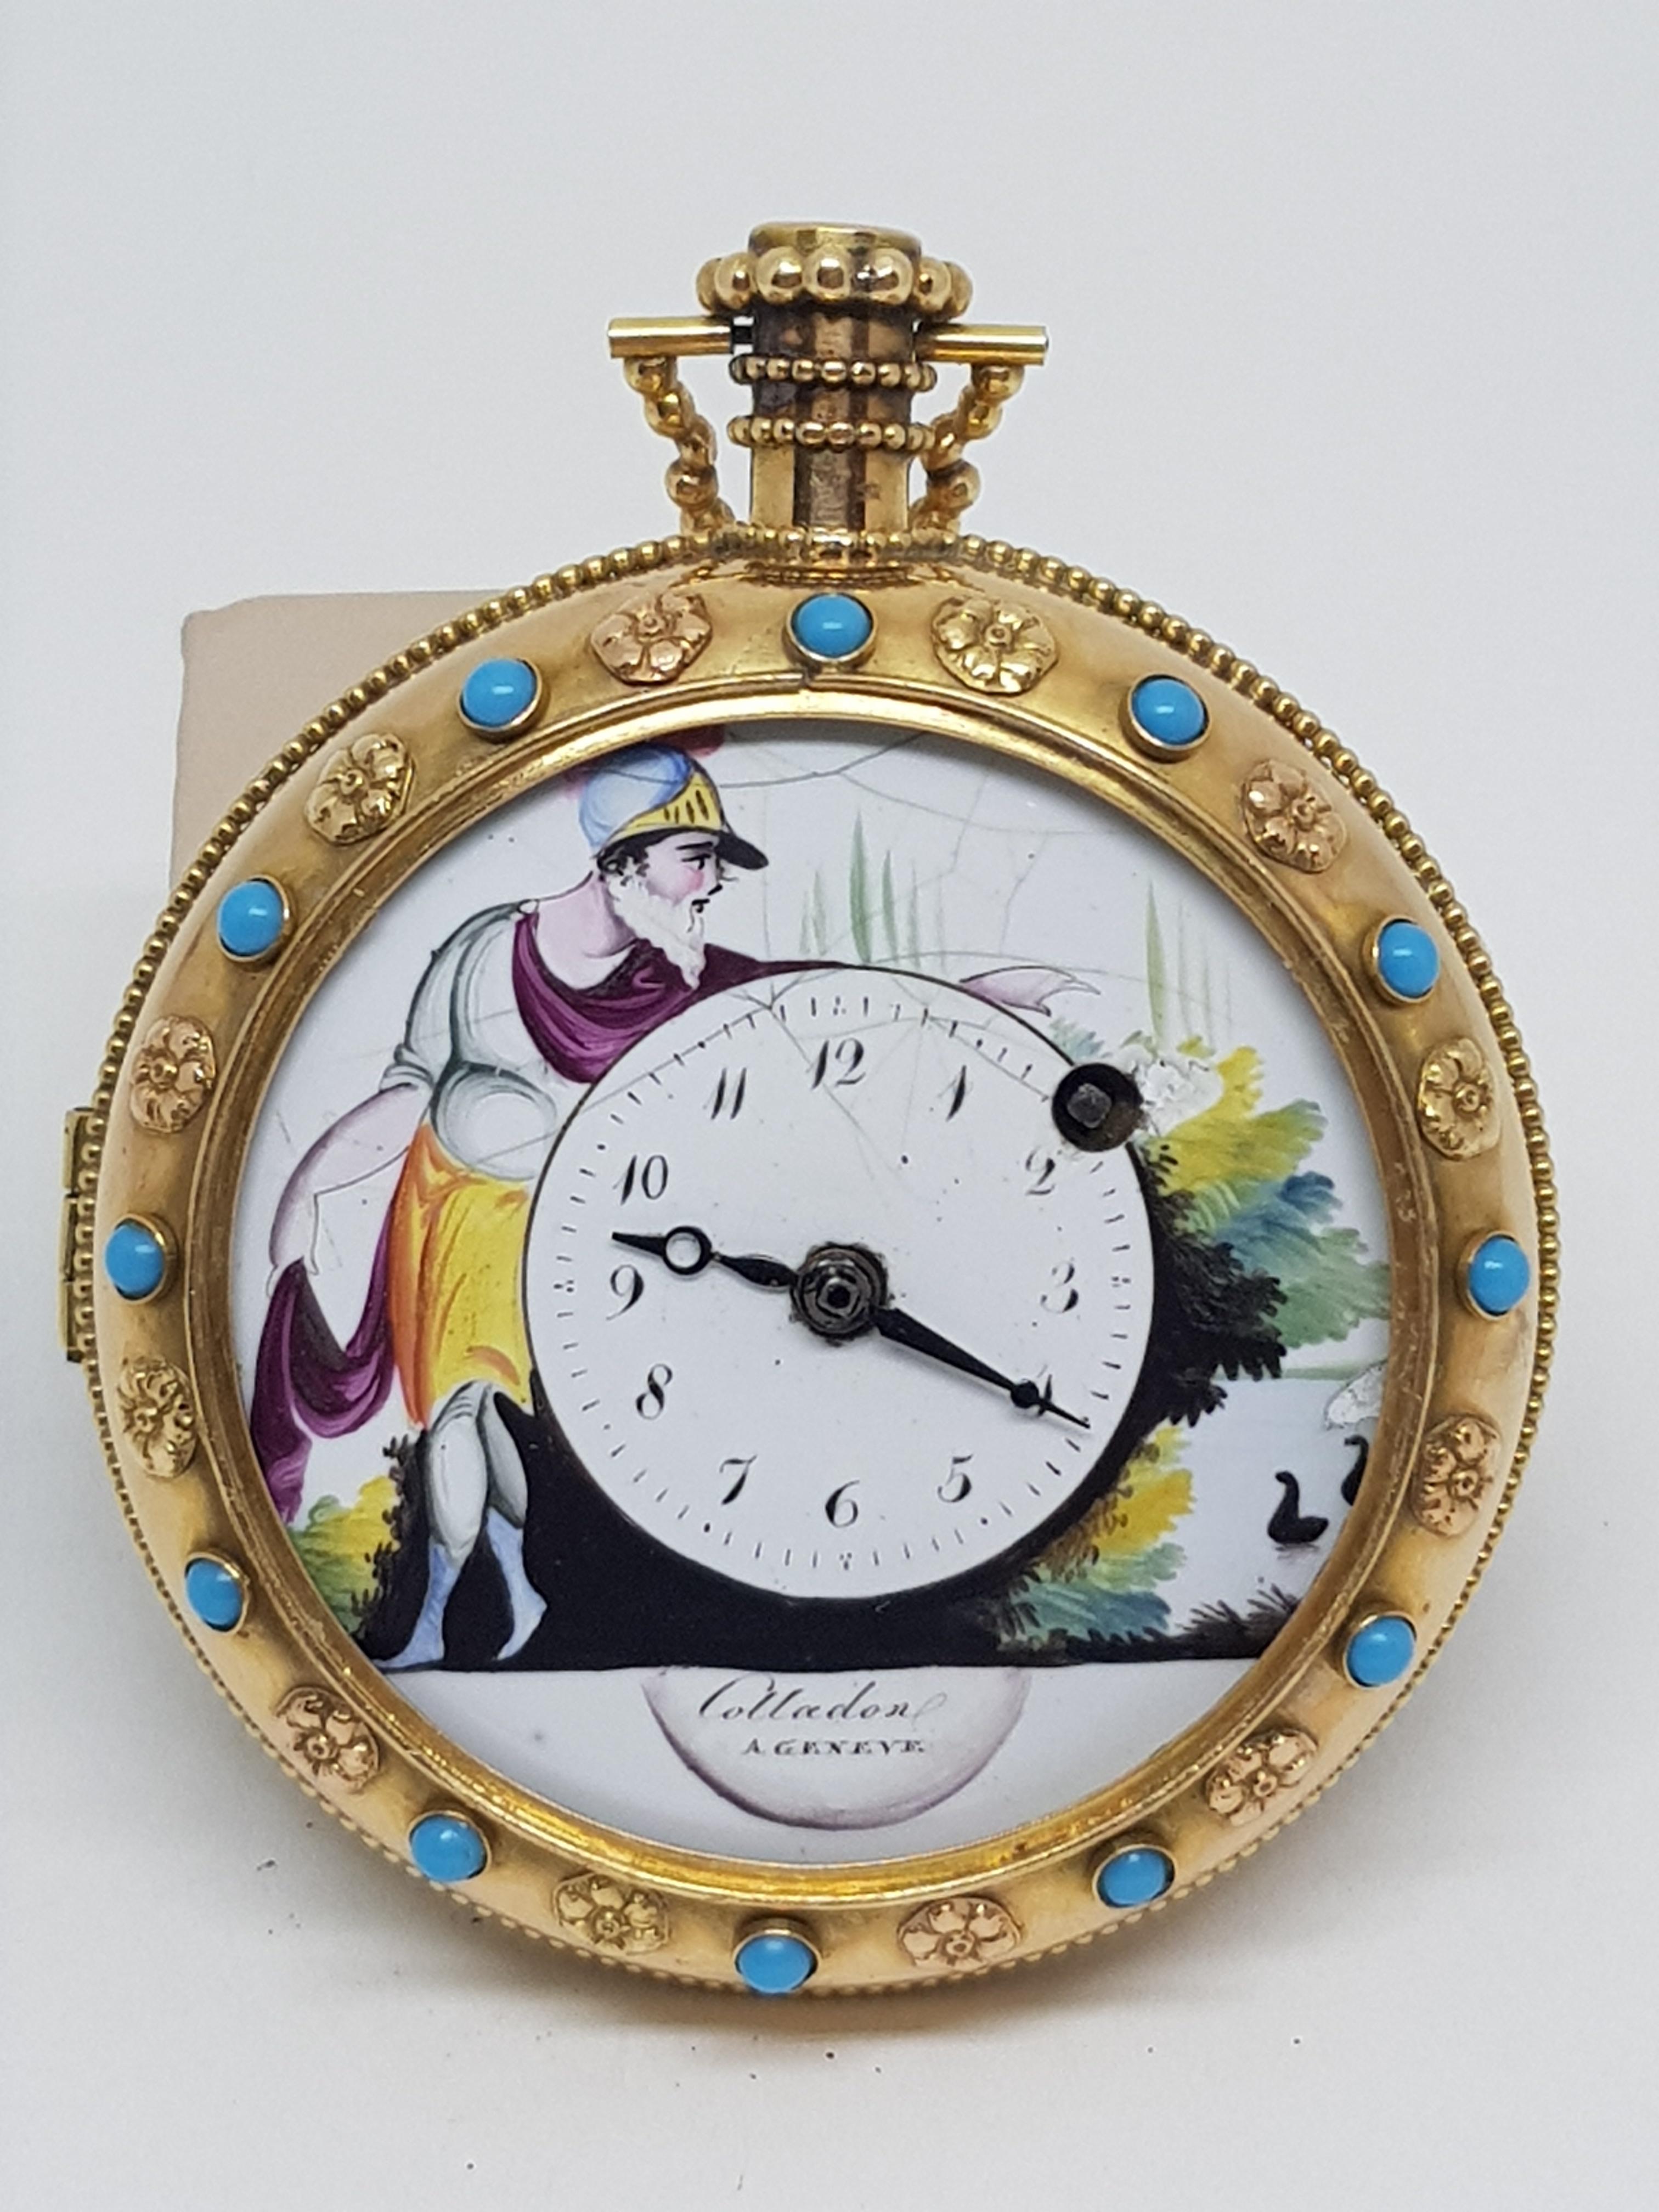 Colladon A. Geneve Antique Turquoise Baby Pearls Enamel Gold Pocket Watch For Sale 5